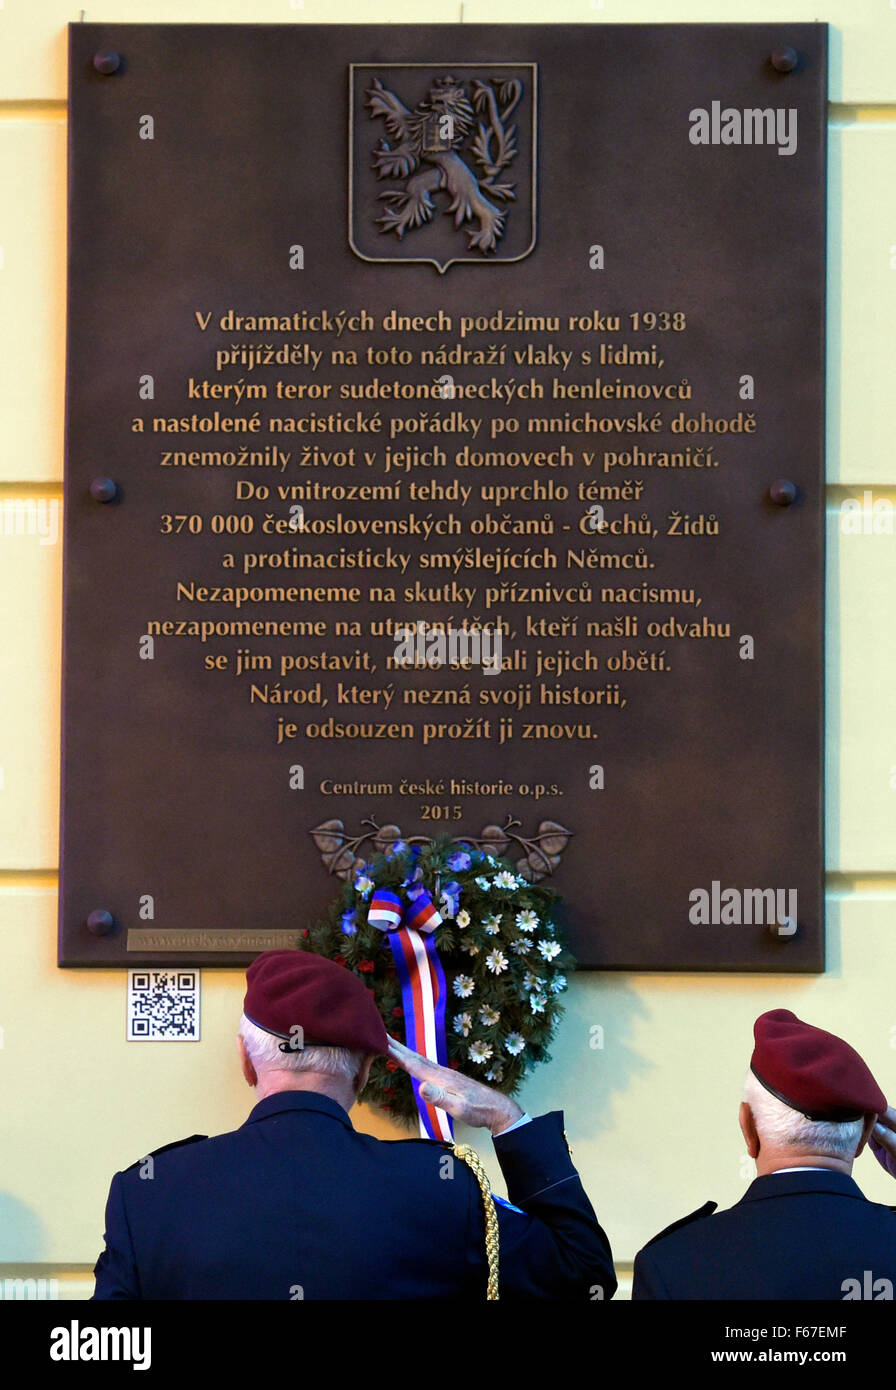 A plaque commemorating the Czechs, Jews and anti-Nazi-minded Germans expelled from the Czechoslovak border areas after the signing of the Munich Agreement in 1938 was unveiled today, on Thursday, November 12, 2015, at Prague´s Masaryk Railway Station where many of the expellees were arriving in autumn 1938. Based on the Munich Agreement, which the German, Italian, British and French leaders signed on September 30, 1938, Czechoslovakia had to cede Sudetenland, or its border regions with a prevailing German population, to Hitler´s Germany. The plaque was unveiled in the presence and under the ae Stock Photo